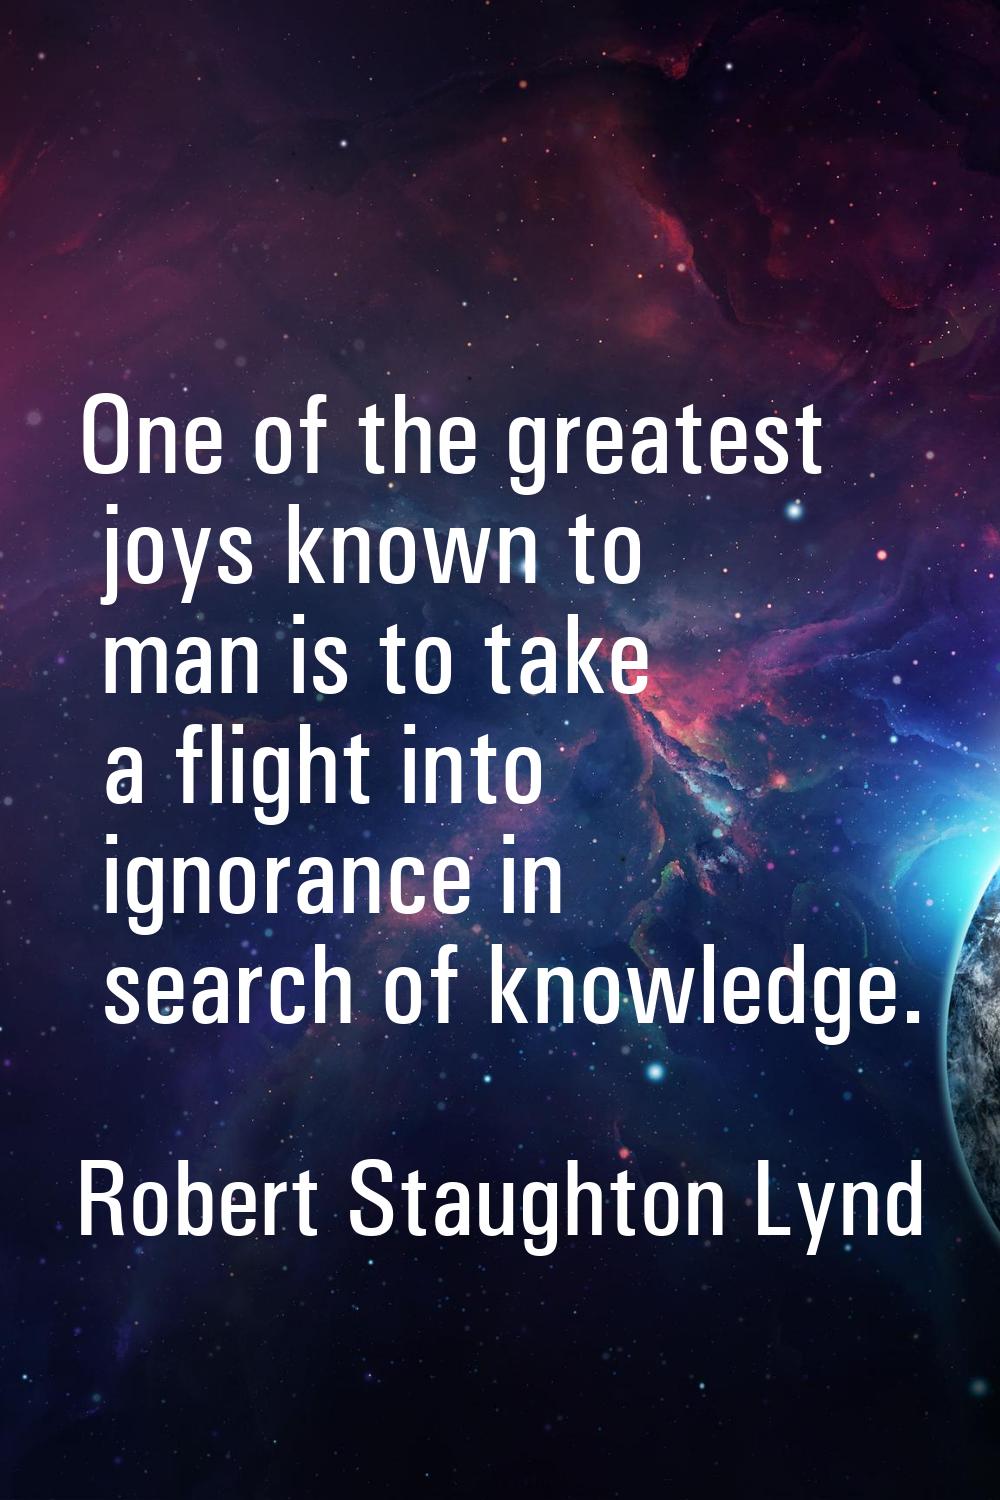 One of the greatest joys known to man is to take a flight into ignorance in search of knowledge.